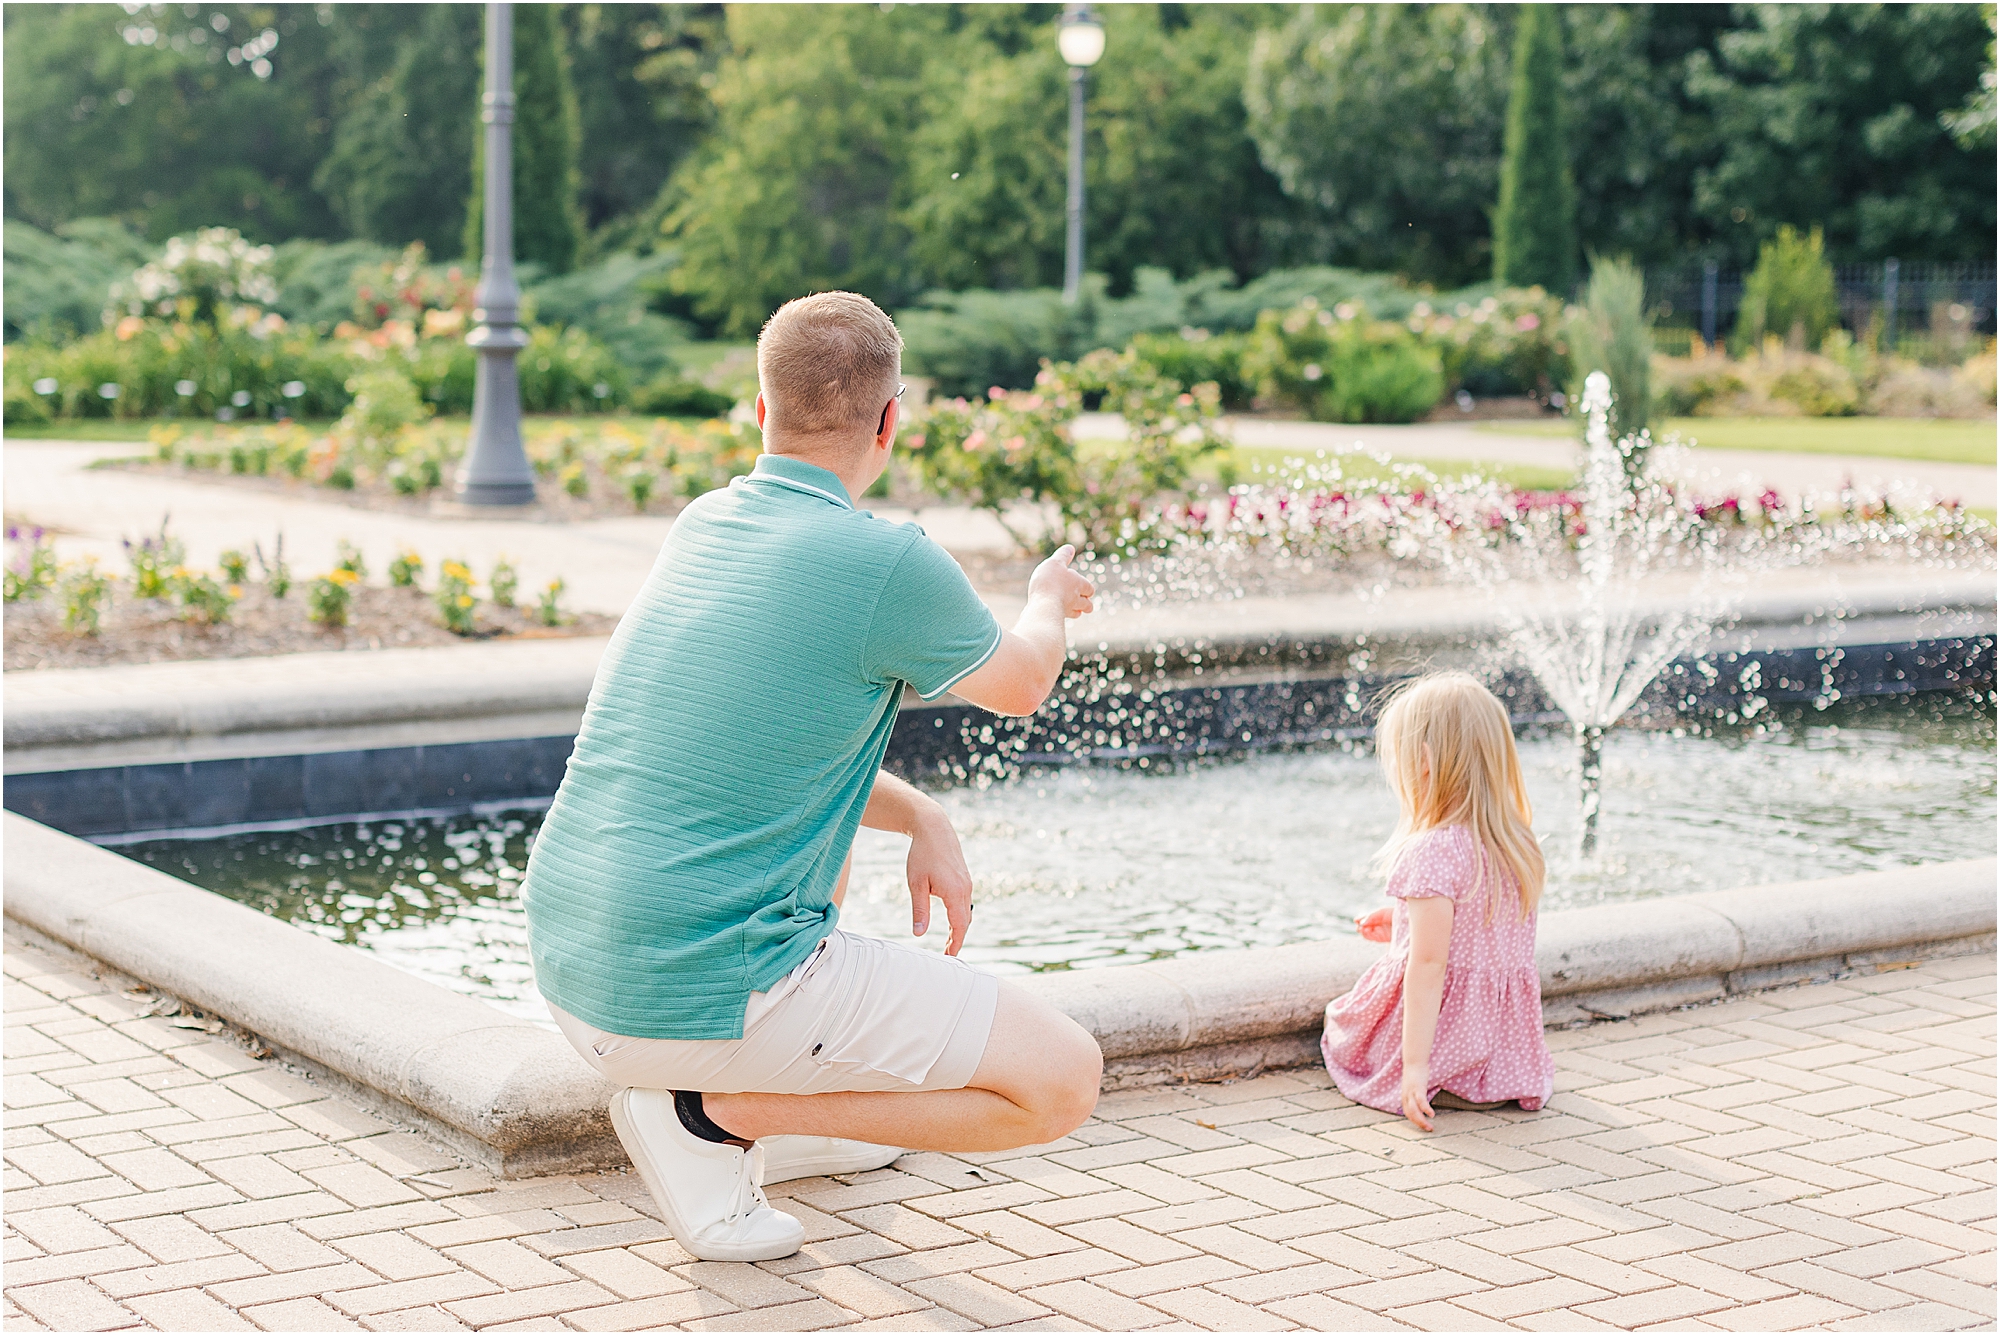 Daddy and daughter throwing pebbles in the fountain at a summer family photo session.